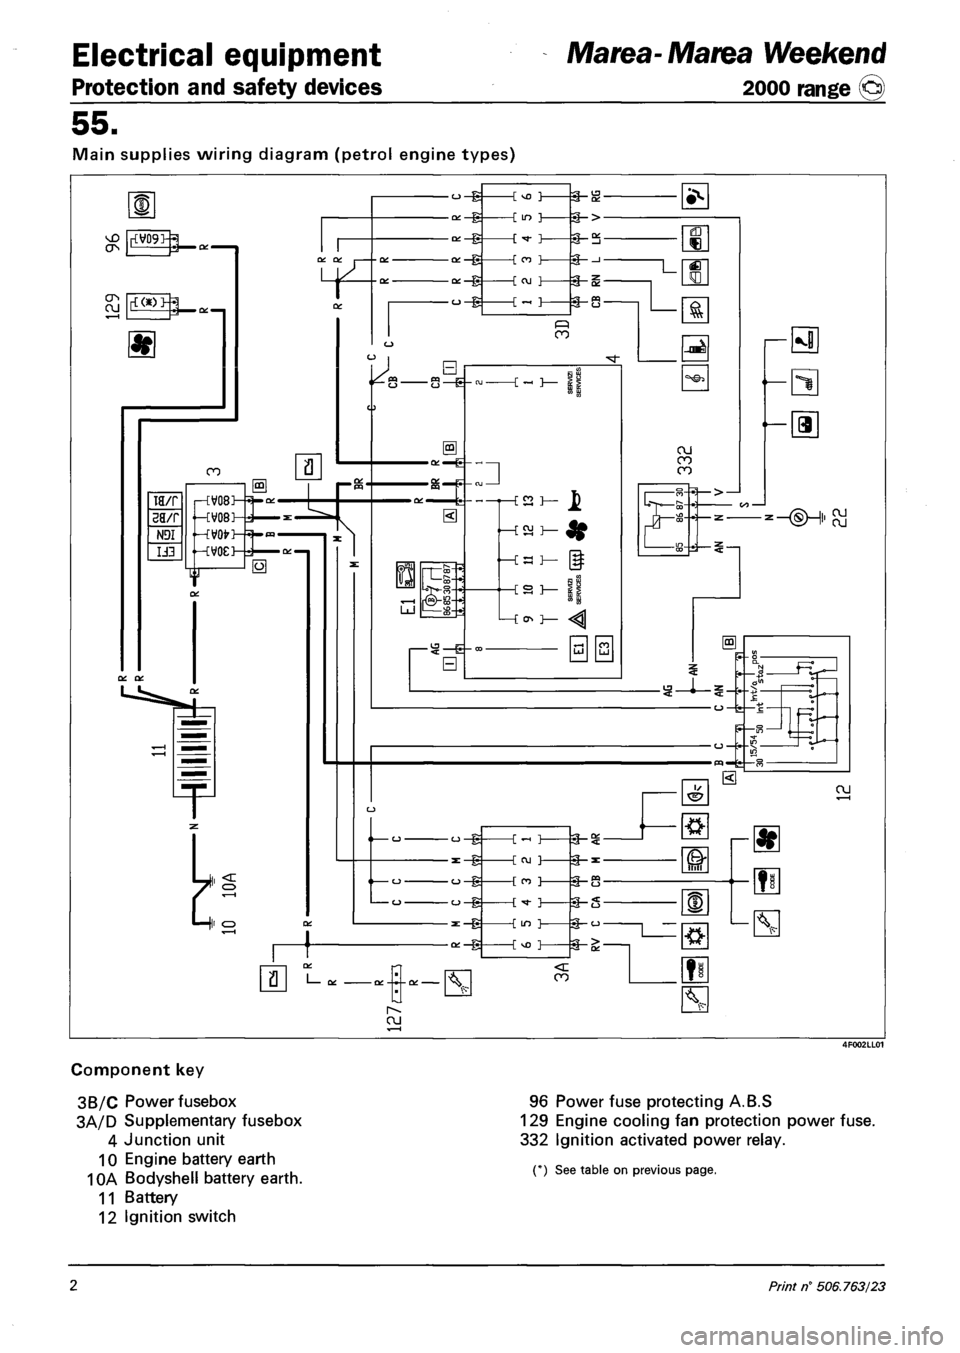 FIAT MAREA 2001 1.G User Guide Electrical equipment 
Protection and safety devices 
Marea- Marea Weekend 
2000 range ©) 
55. 
Main supplies wiring diagram (petrol engine types) 
Component key 
3B/C Power fusebox 
3A/D Supplementar